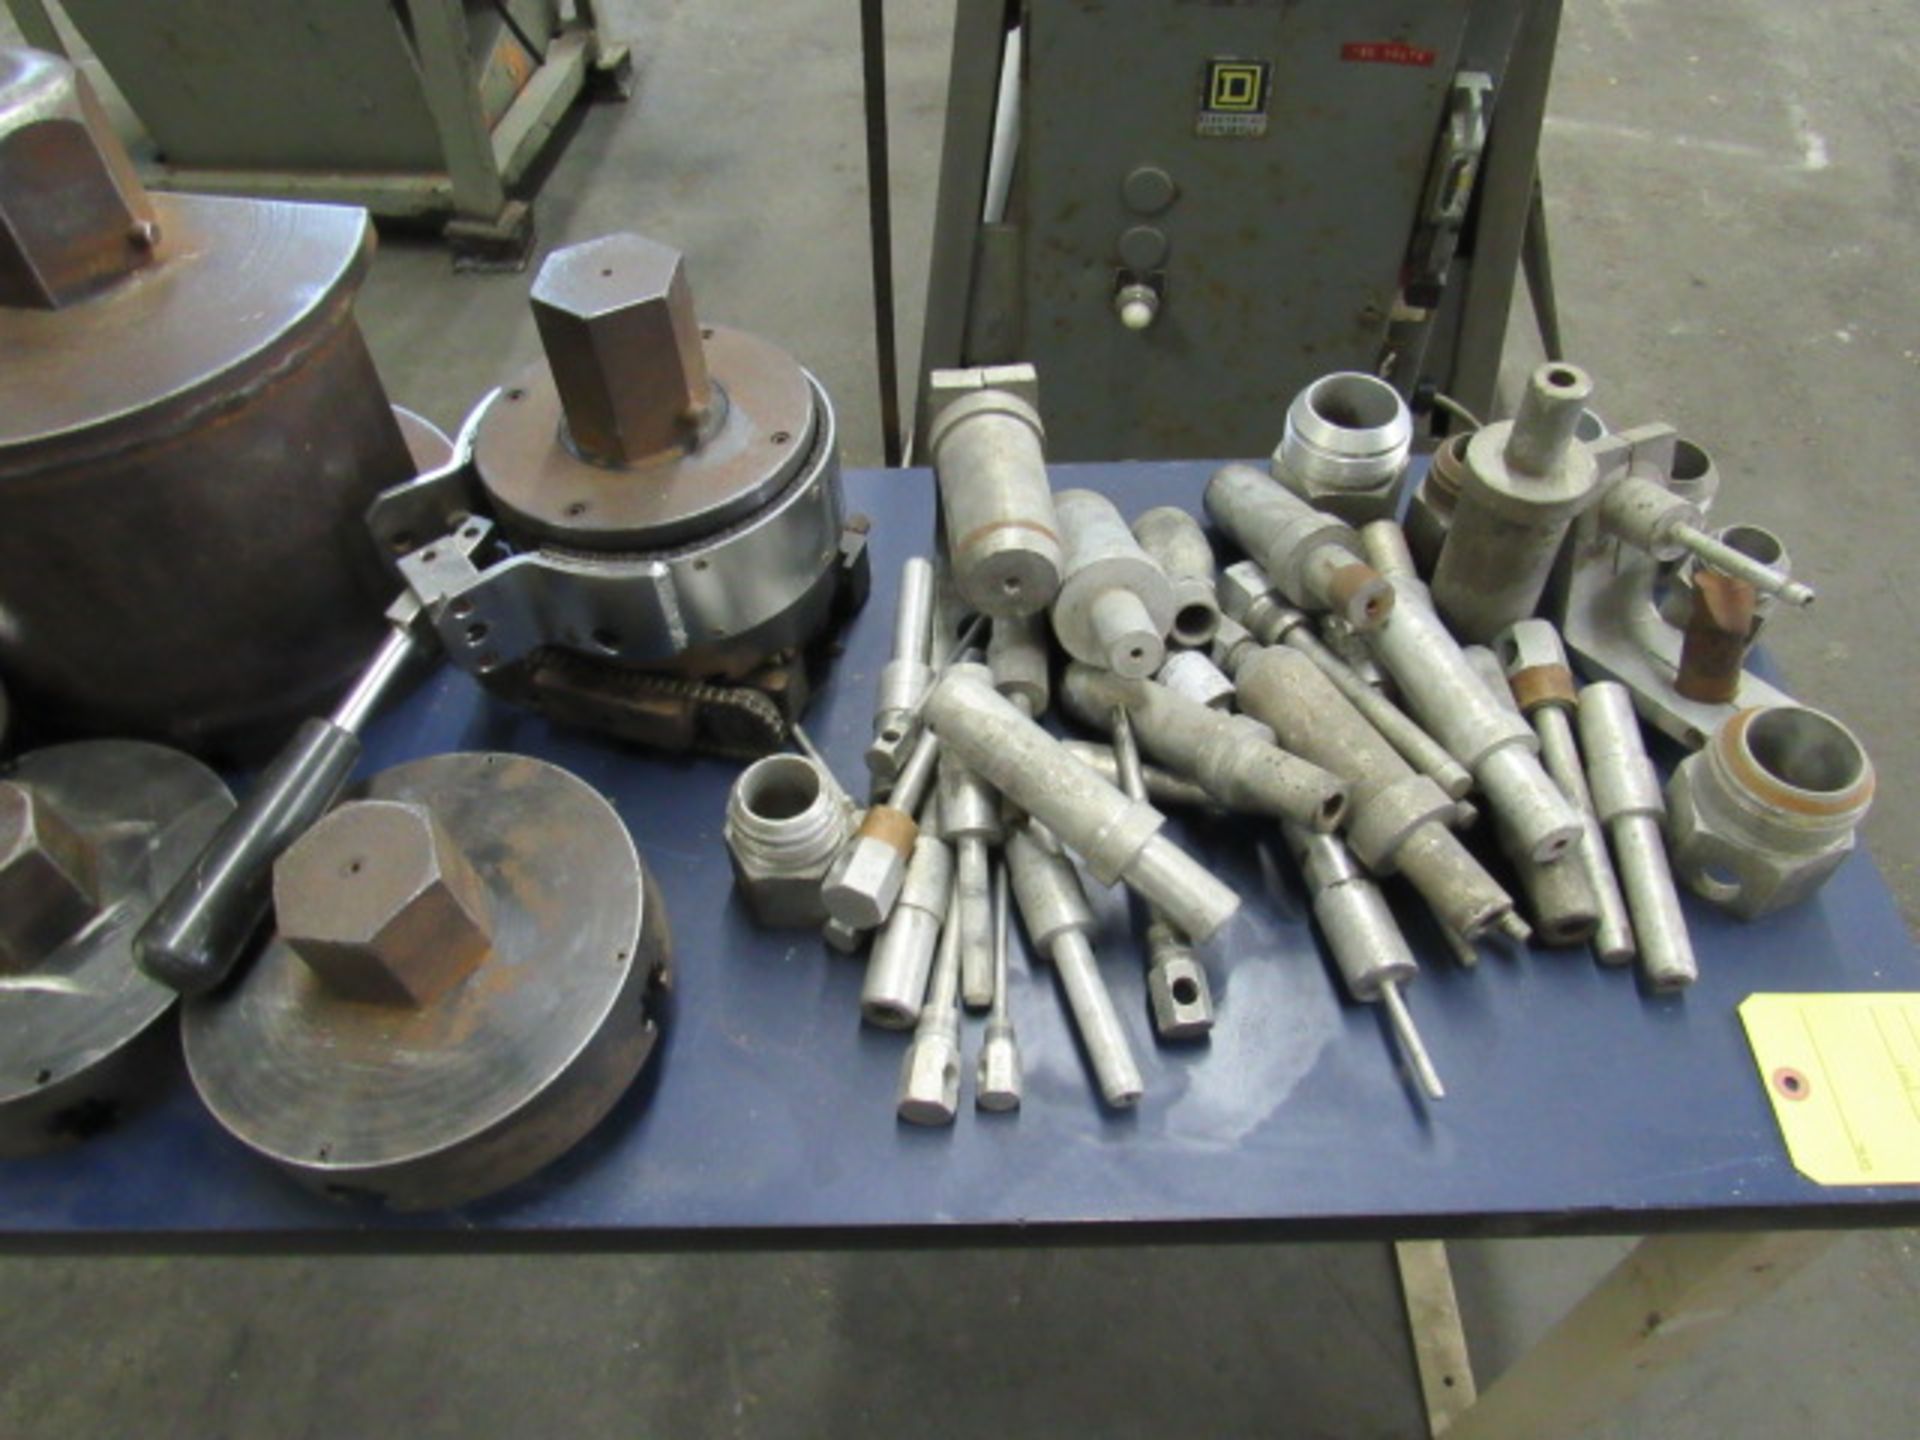 DOG-LEG HOSE ASSEMBLY MACHINE, AEROQUIP MDL. A, new 1985, 4” to 48” cap., large qty. of tooling & - Image 8 of 8